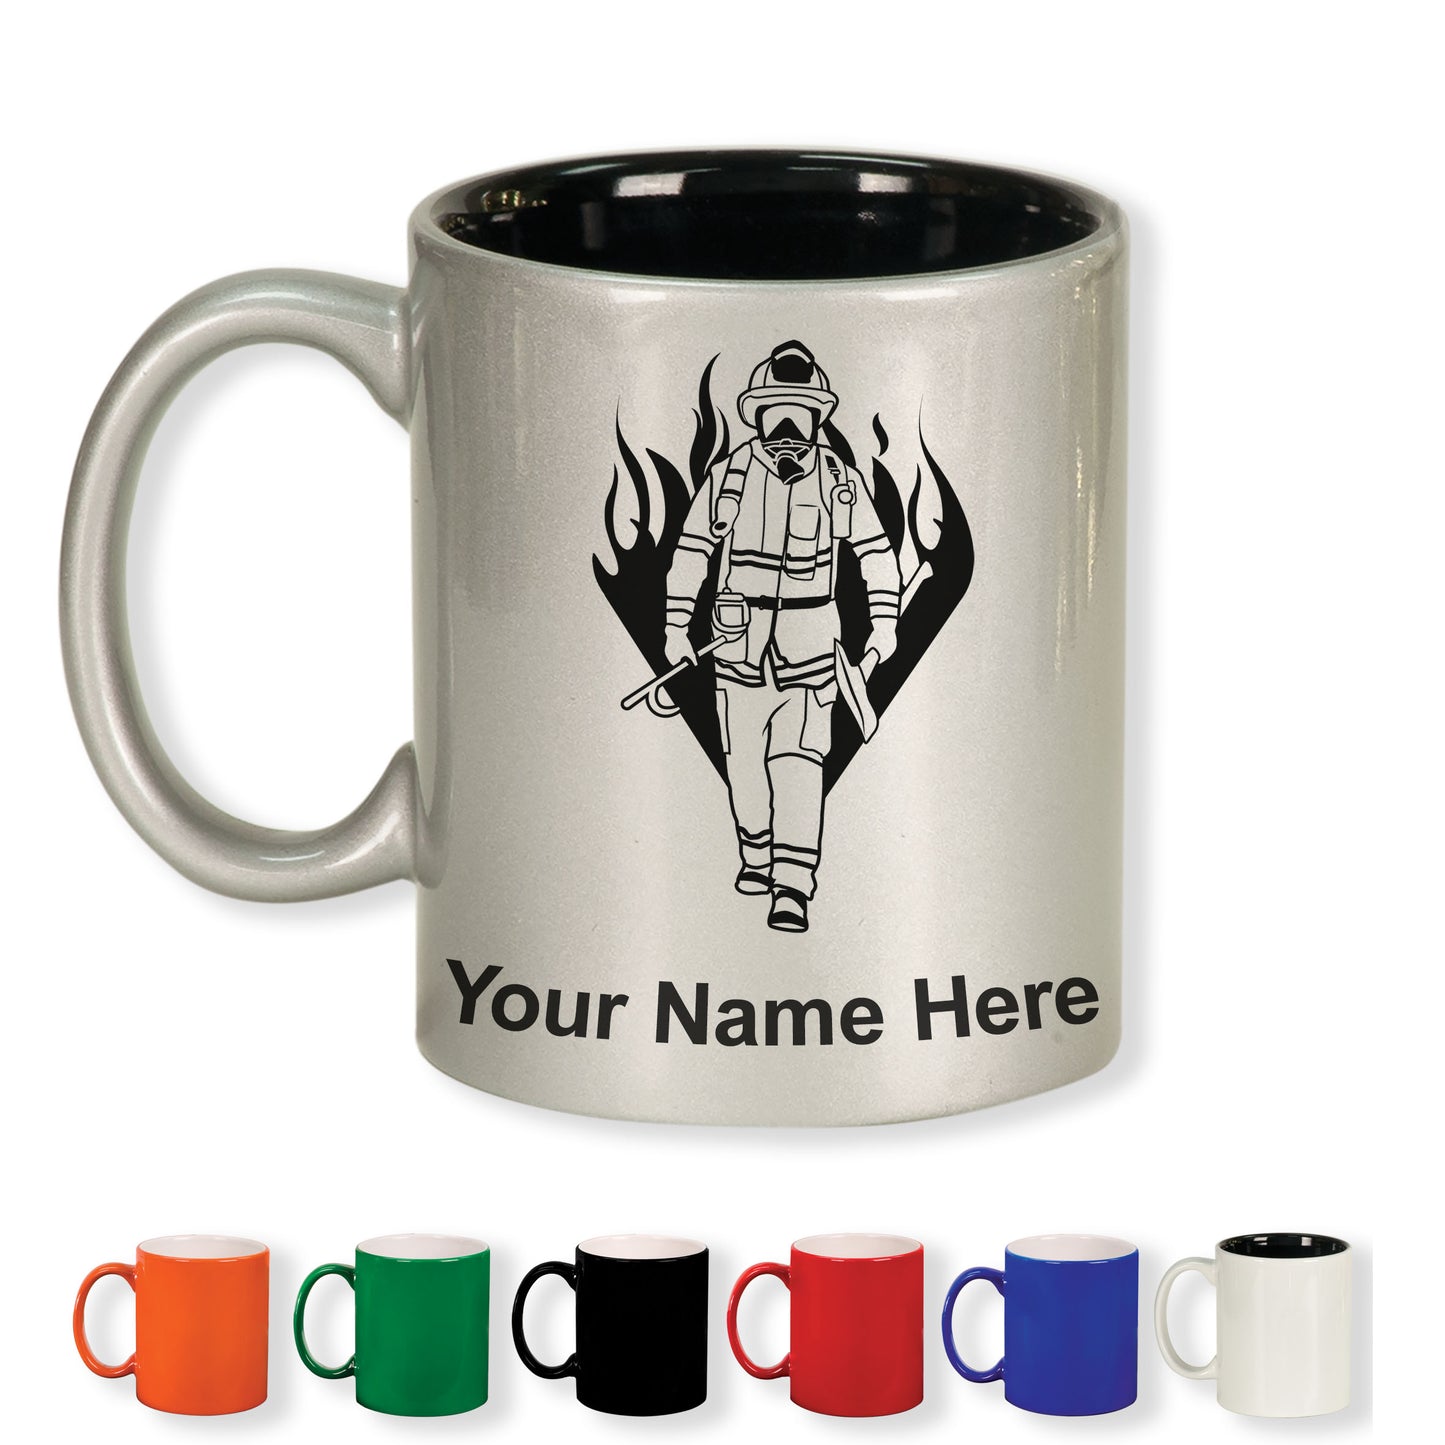 11oz Round Ceramic Coffee Mug, Fireman, Personalized Engraving Included